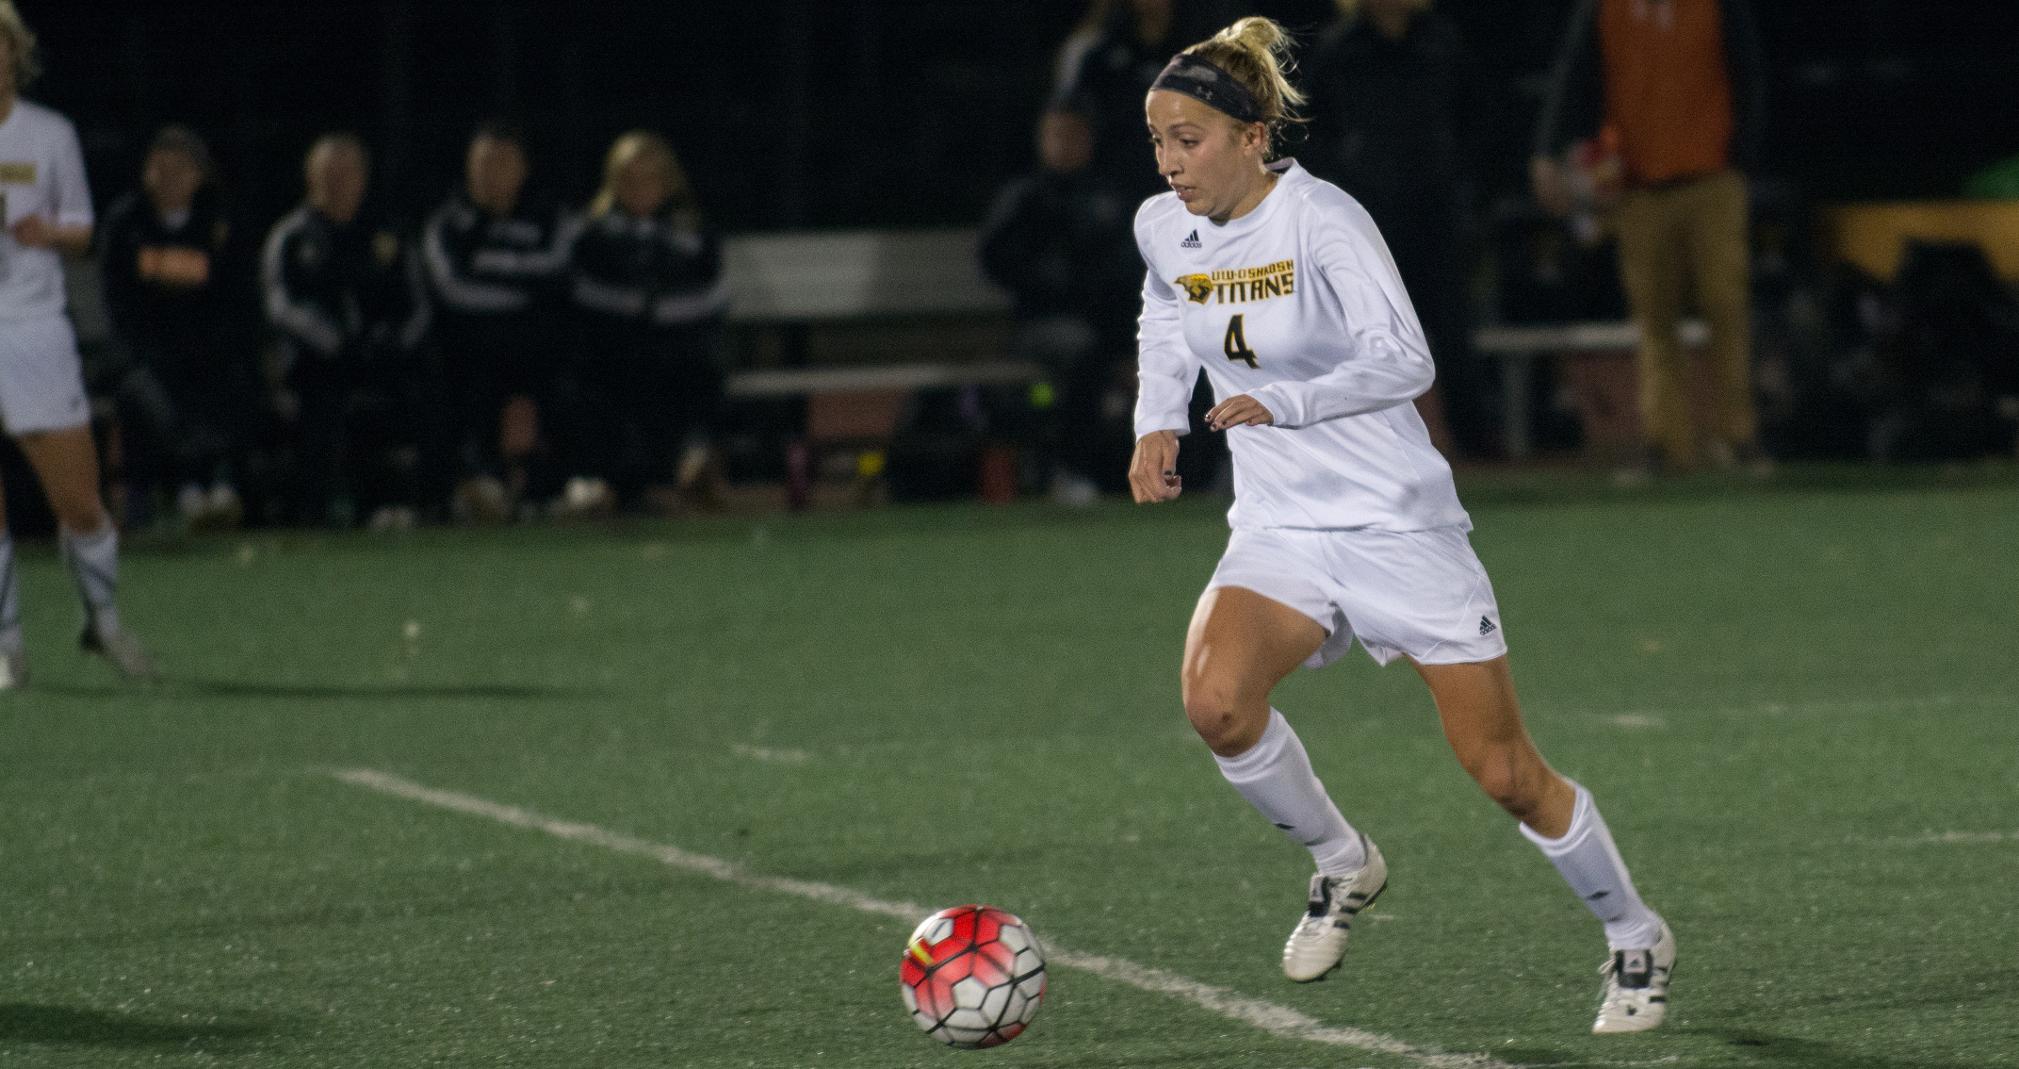 Robyn Elliott tied the match against UW-Whitewater with her fourth goal of the season.